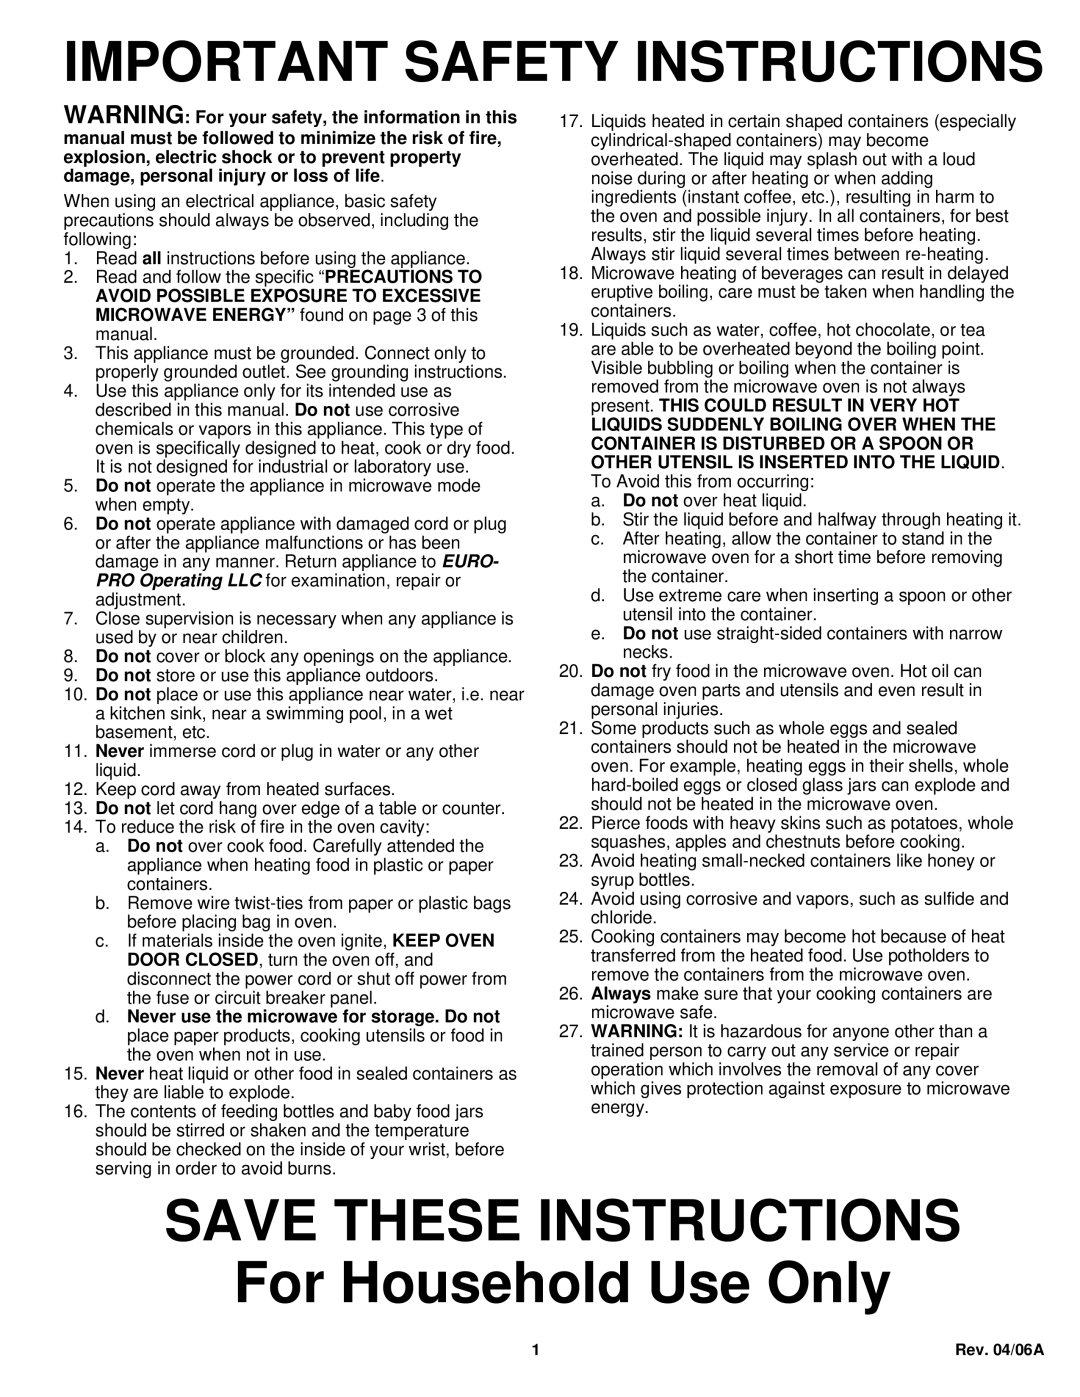 Euro-Pro K5345B owner manual SAVE THESE INSTRUCTIONS For Household Use Only, Important Safety Instructions 